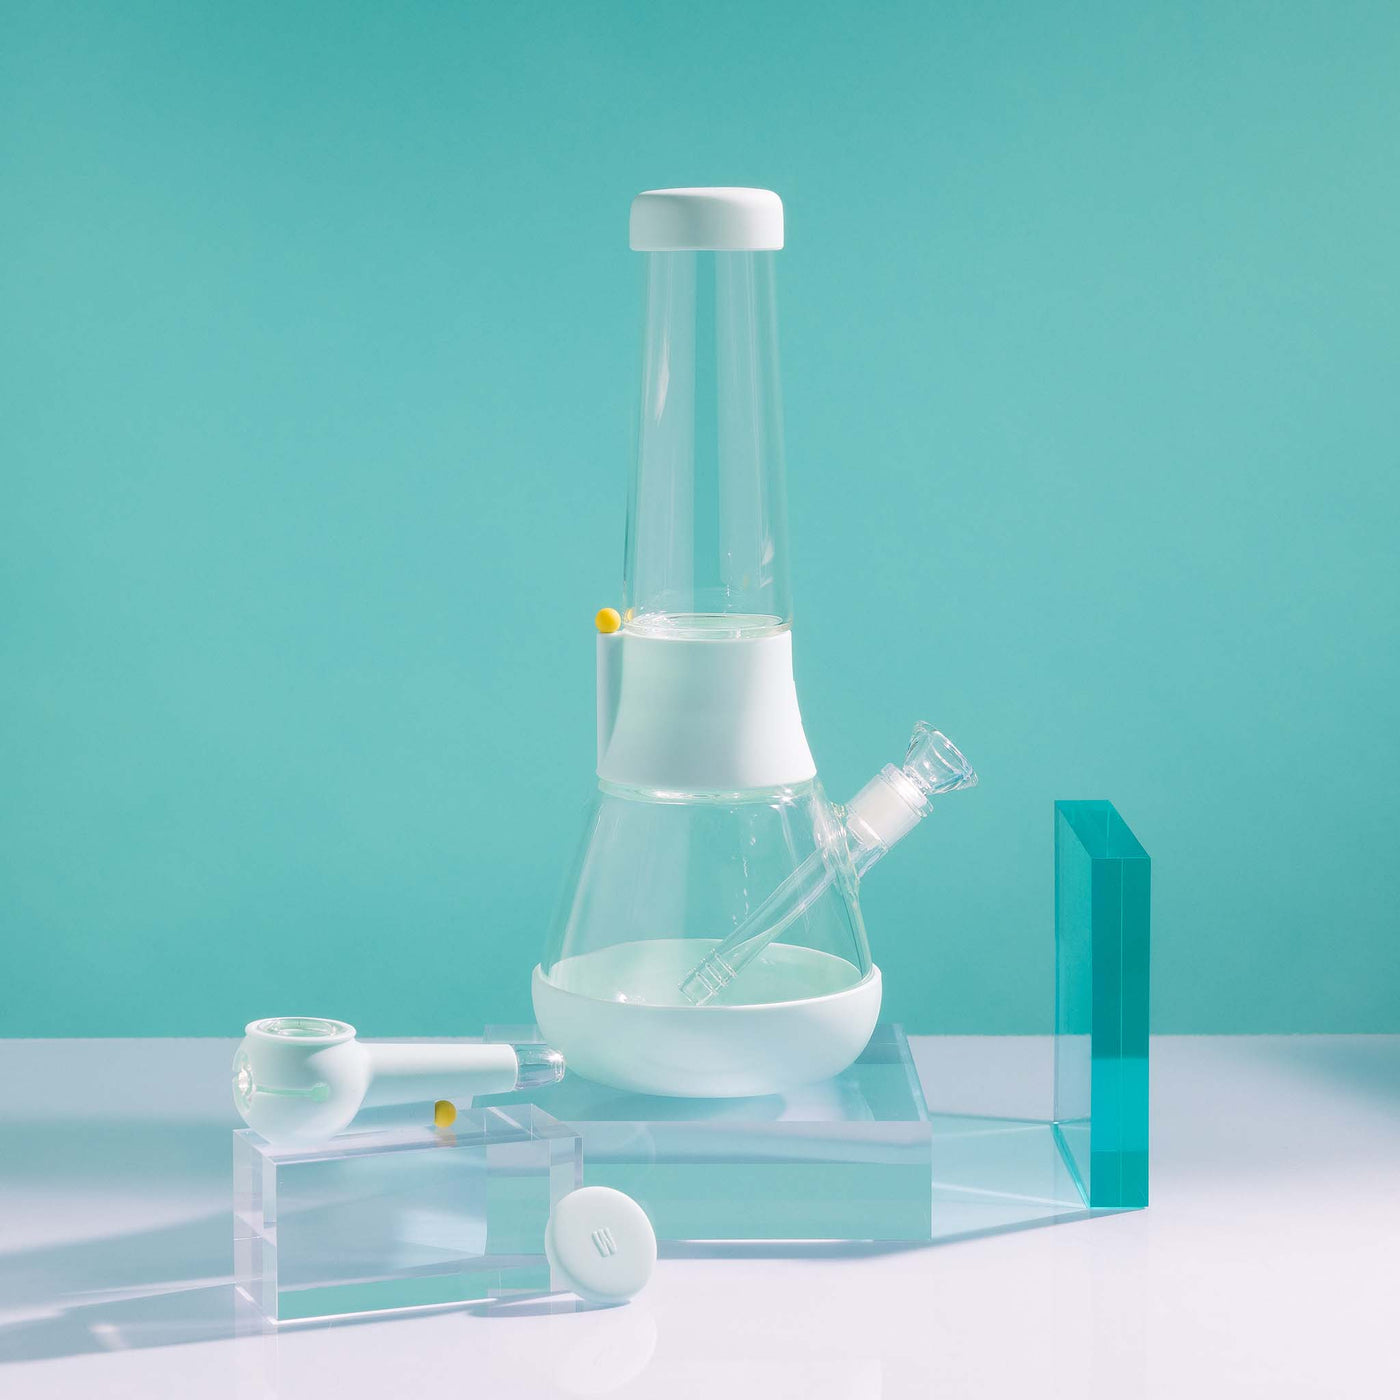  A bundle set of the Weeday beaker bong and silicone pipe with glass bowl, sitting on acrylic blocks, showcased in a sky blue studio setting.